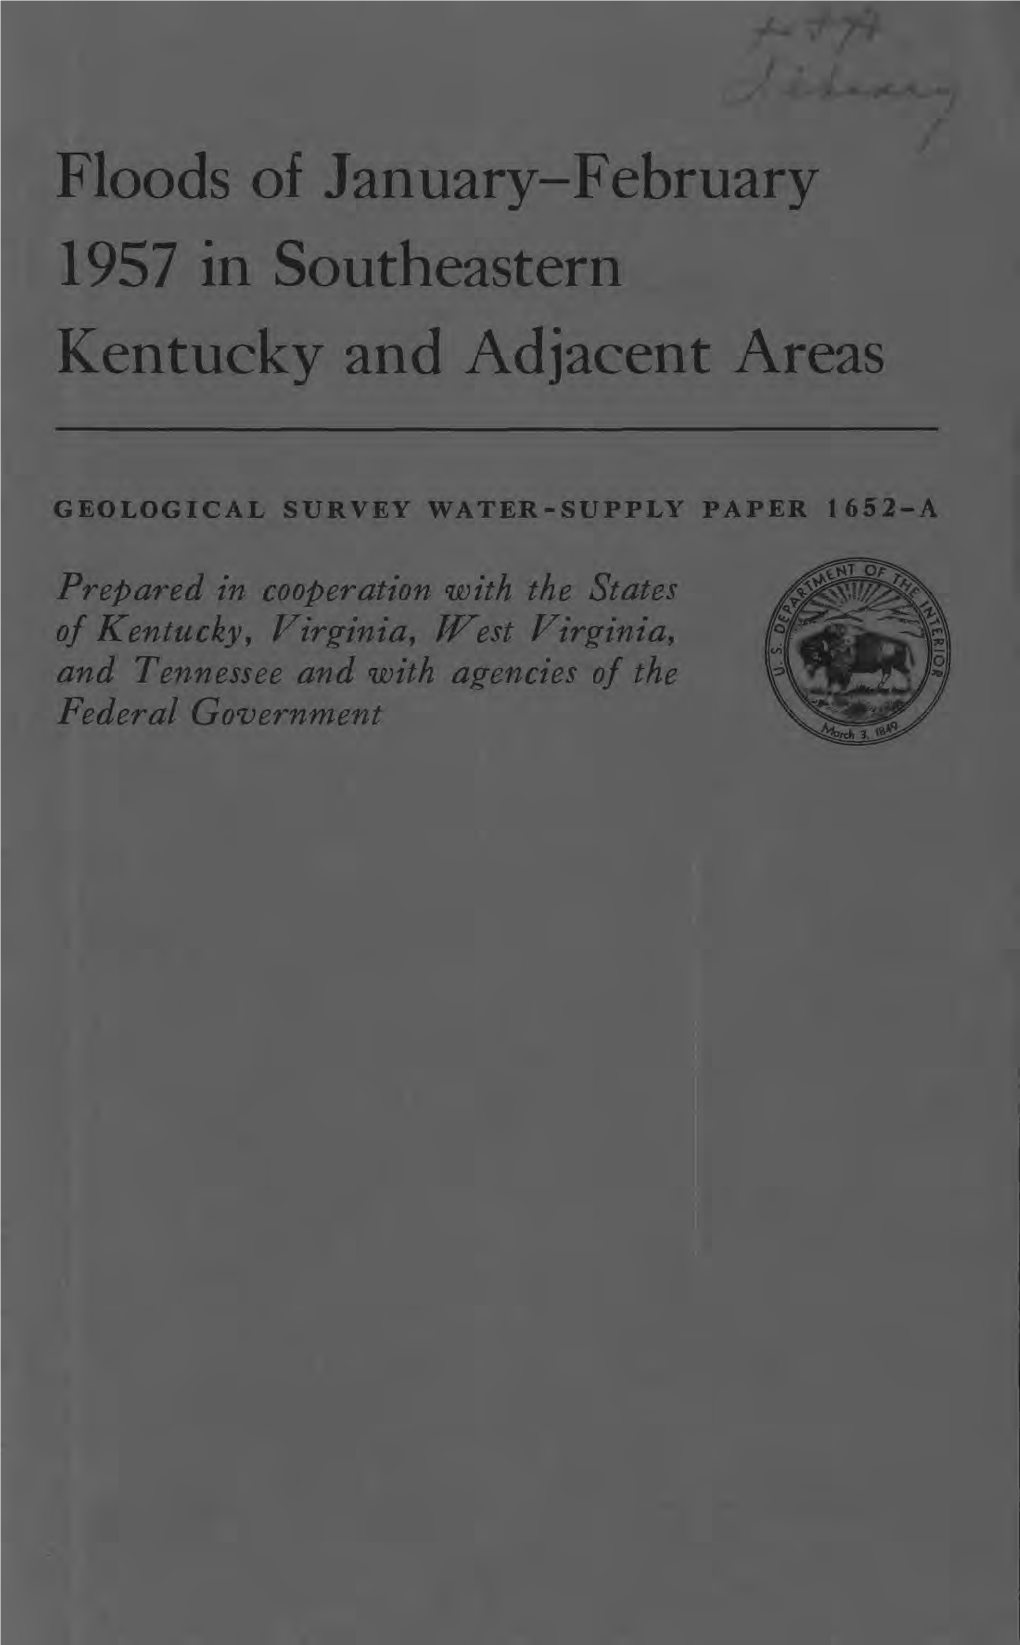 Floods of January-February 1957 in Southeastern Kentucky and Adjacent Areas